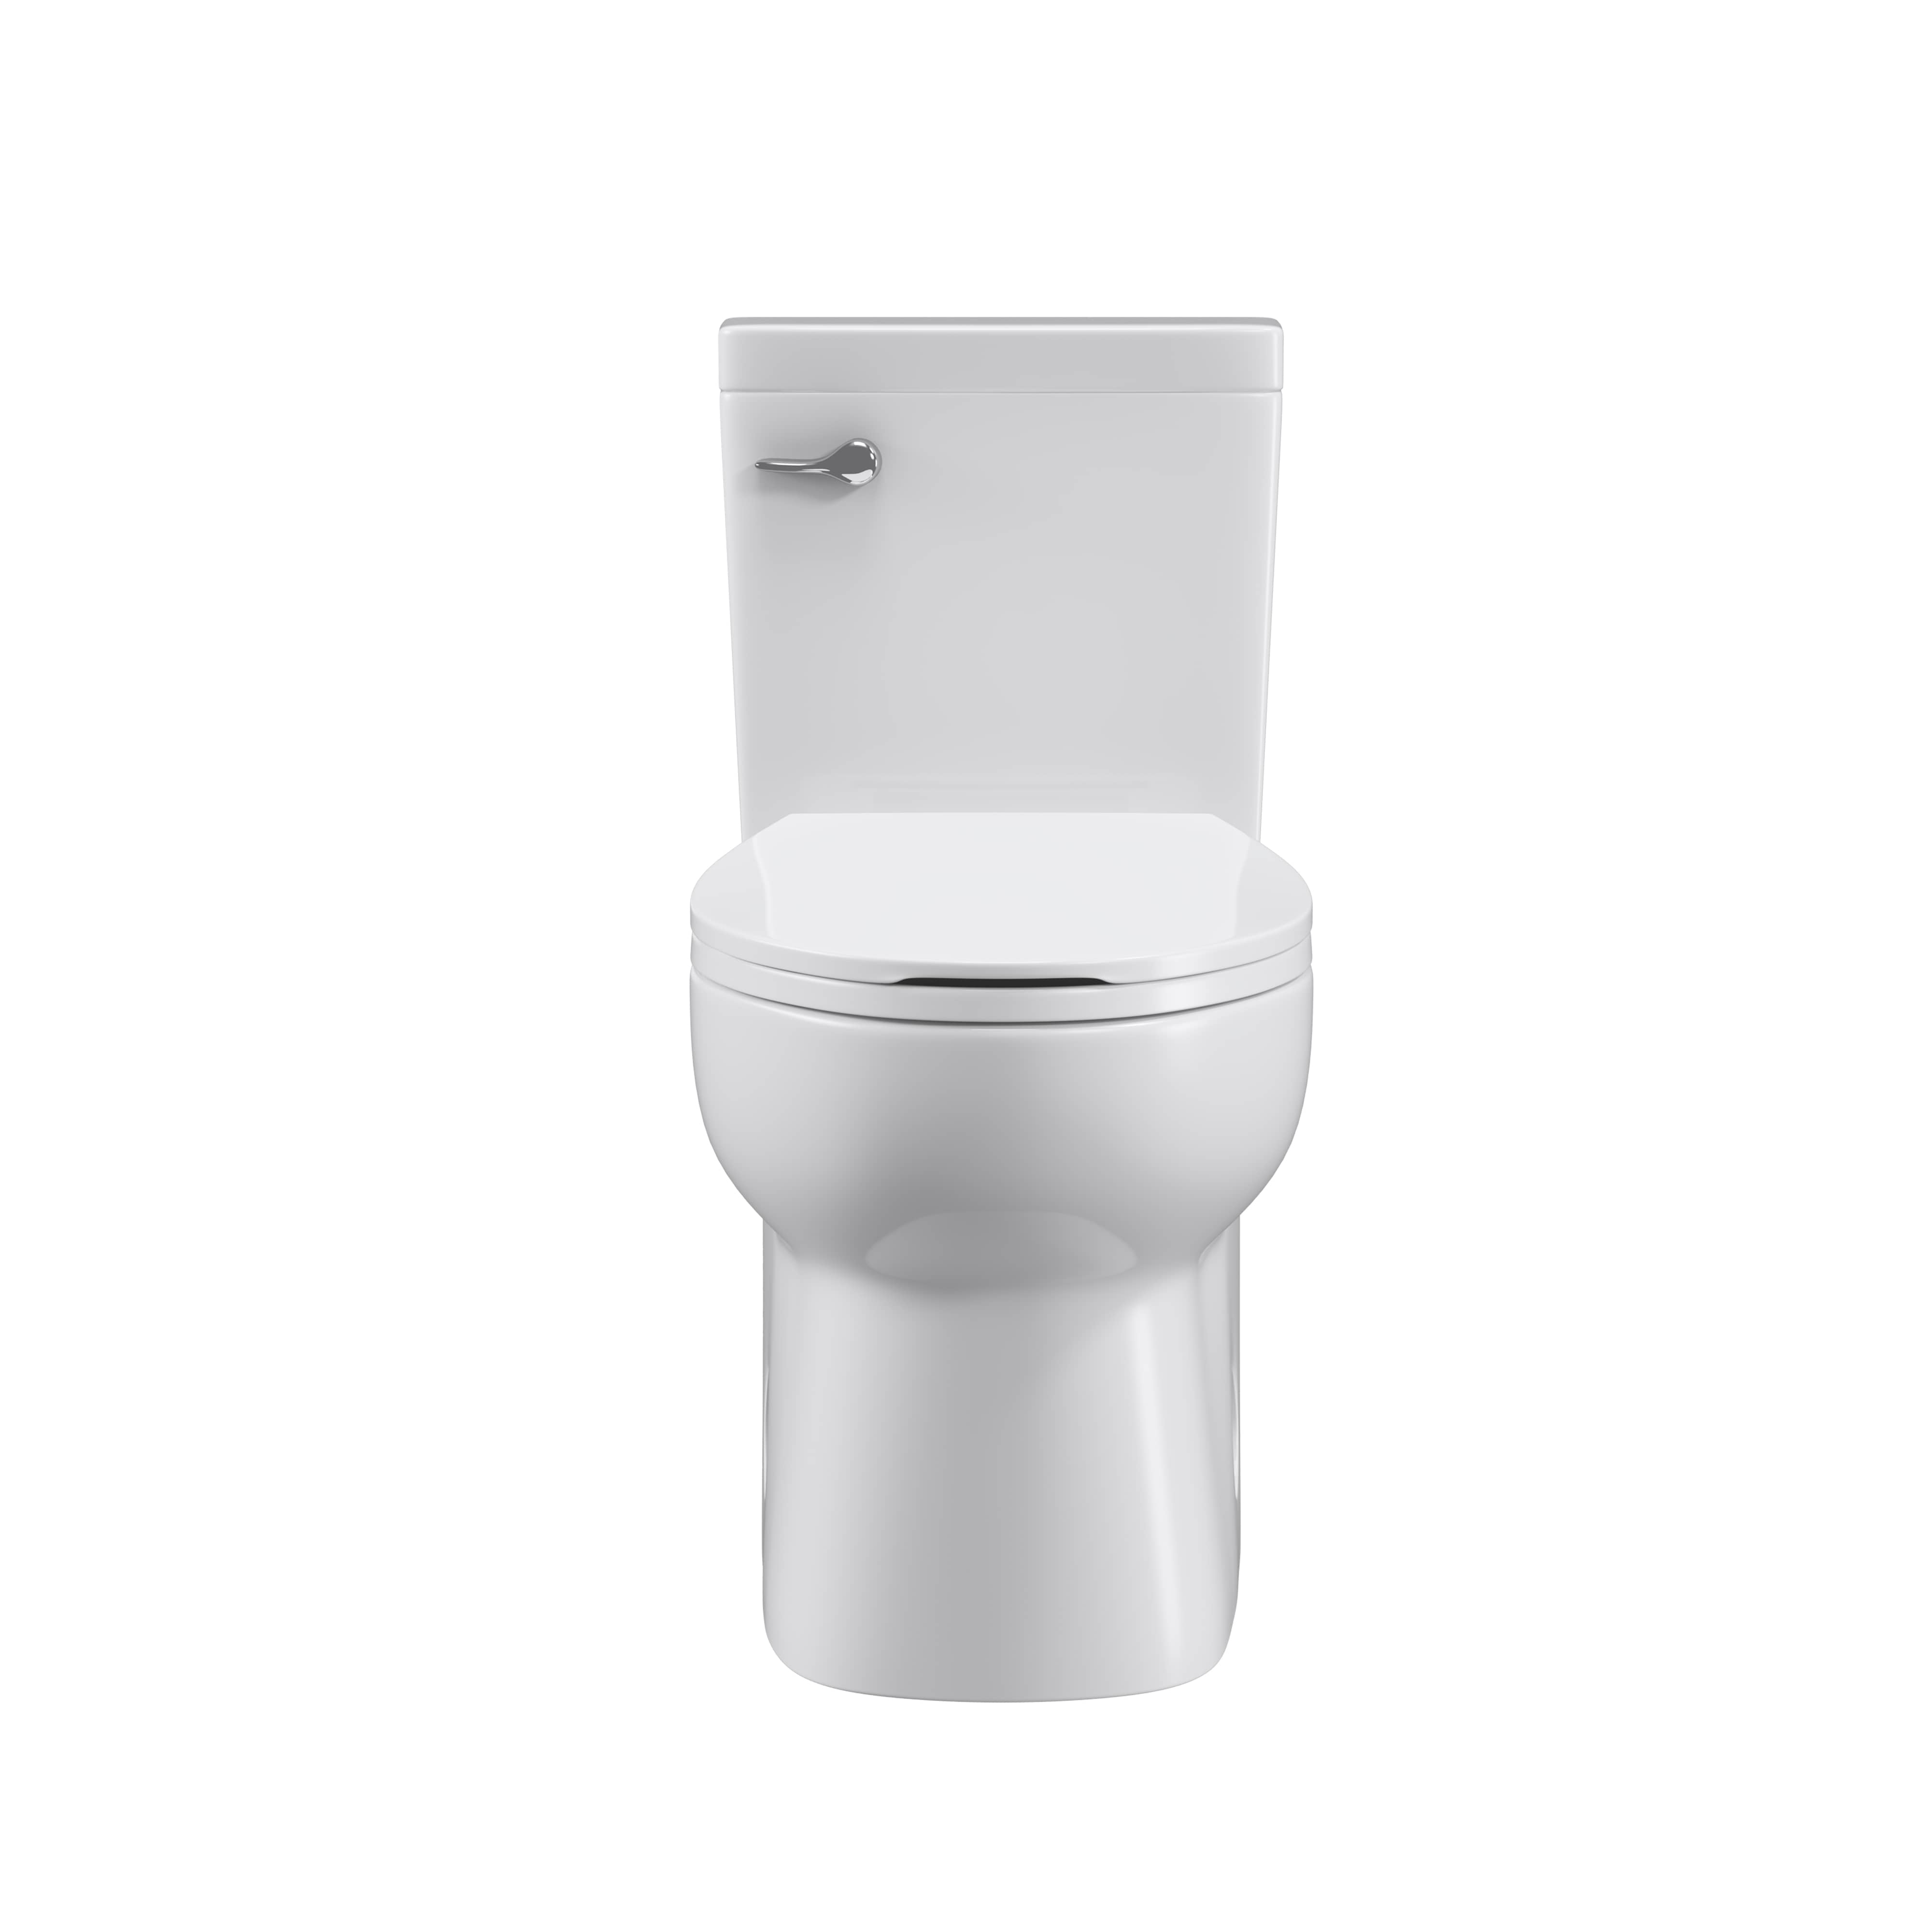 Single Flush Elongated Standard One Piece Toilet with Soft Close Seat Cover, and White Finish Toilet Bowl 